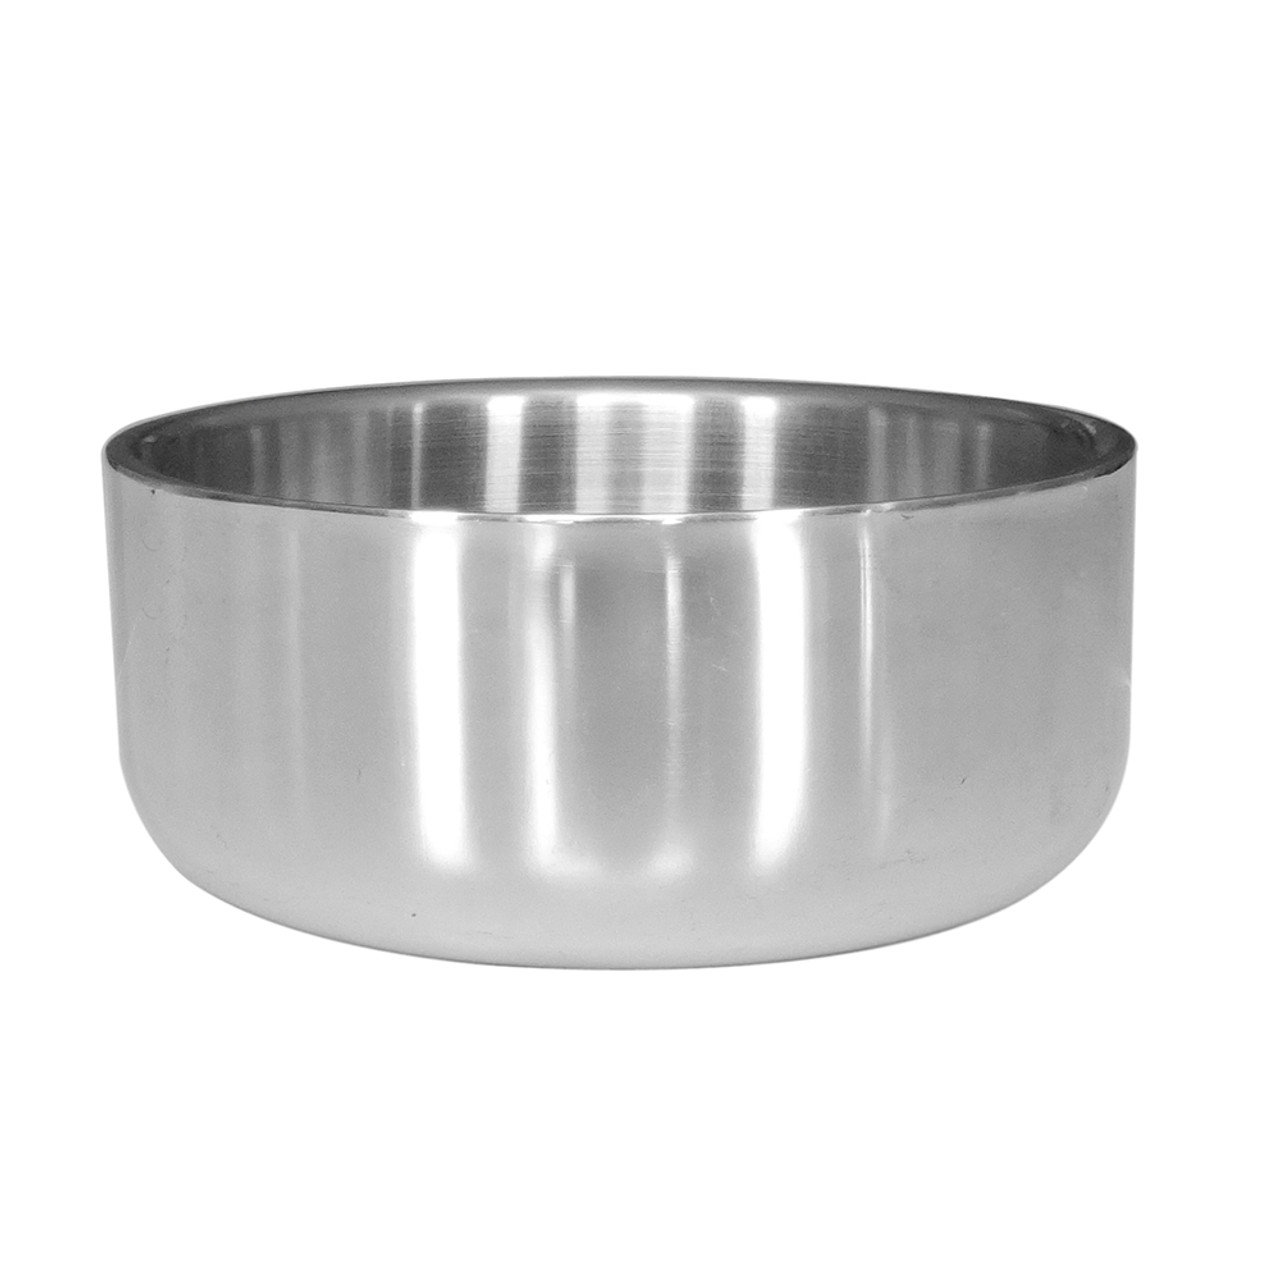 Dineasty Double Wall Stainless Steel Dog Bowl